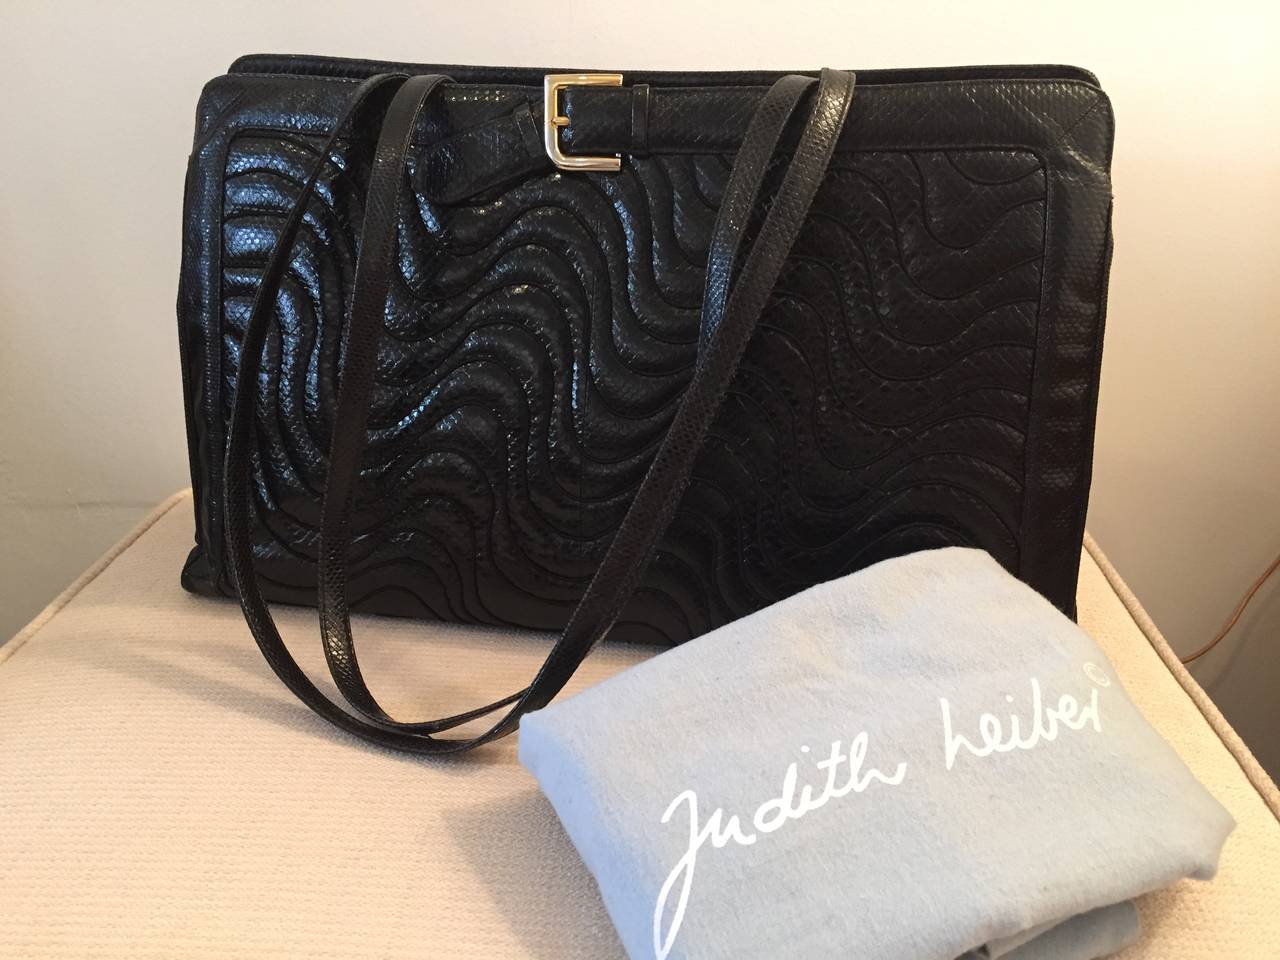 Extra-large Judith Leiber quilted snakeskin pocketbook with two long shoulder straps and buckle Front Design, in pristine condition with box and felt cover.